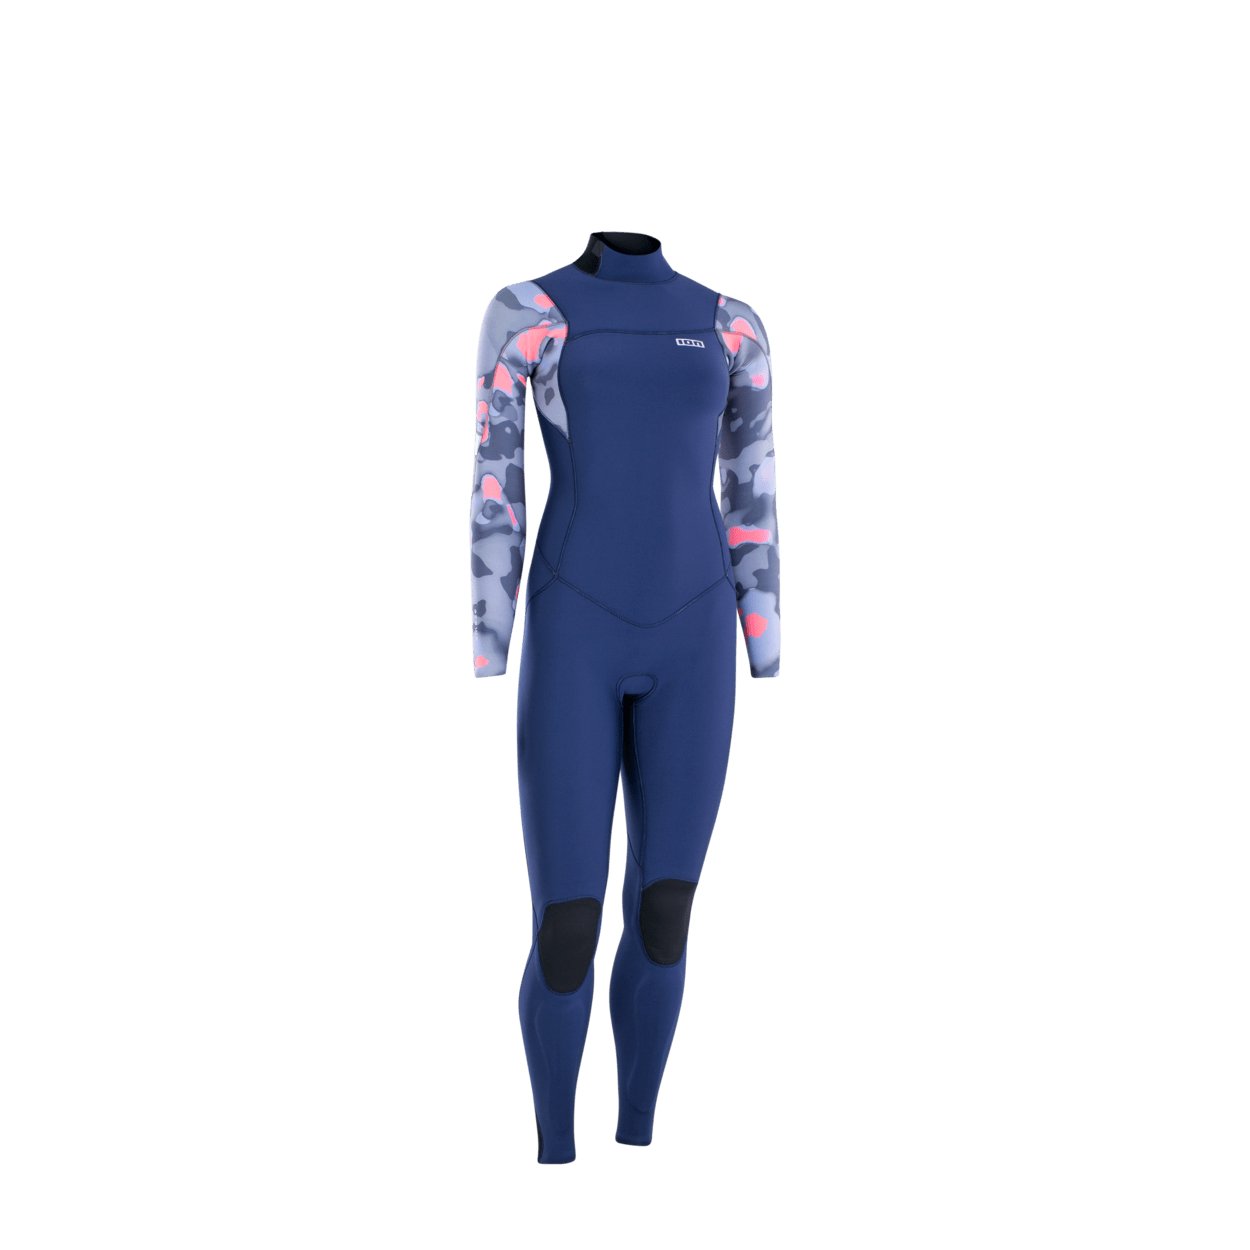 ION Amaze Amp 5/4 Back Zip 2022 - Worthing Watersports - 9010583057460 - Wetsuits - ION Water